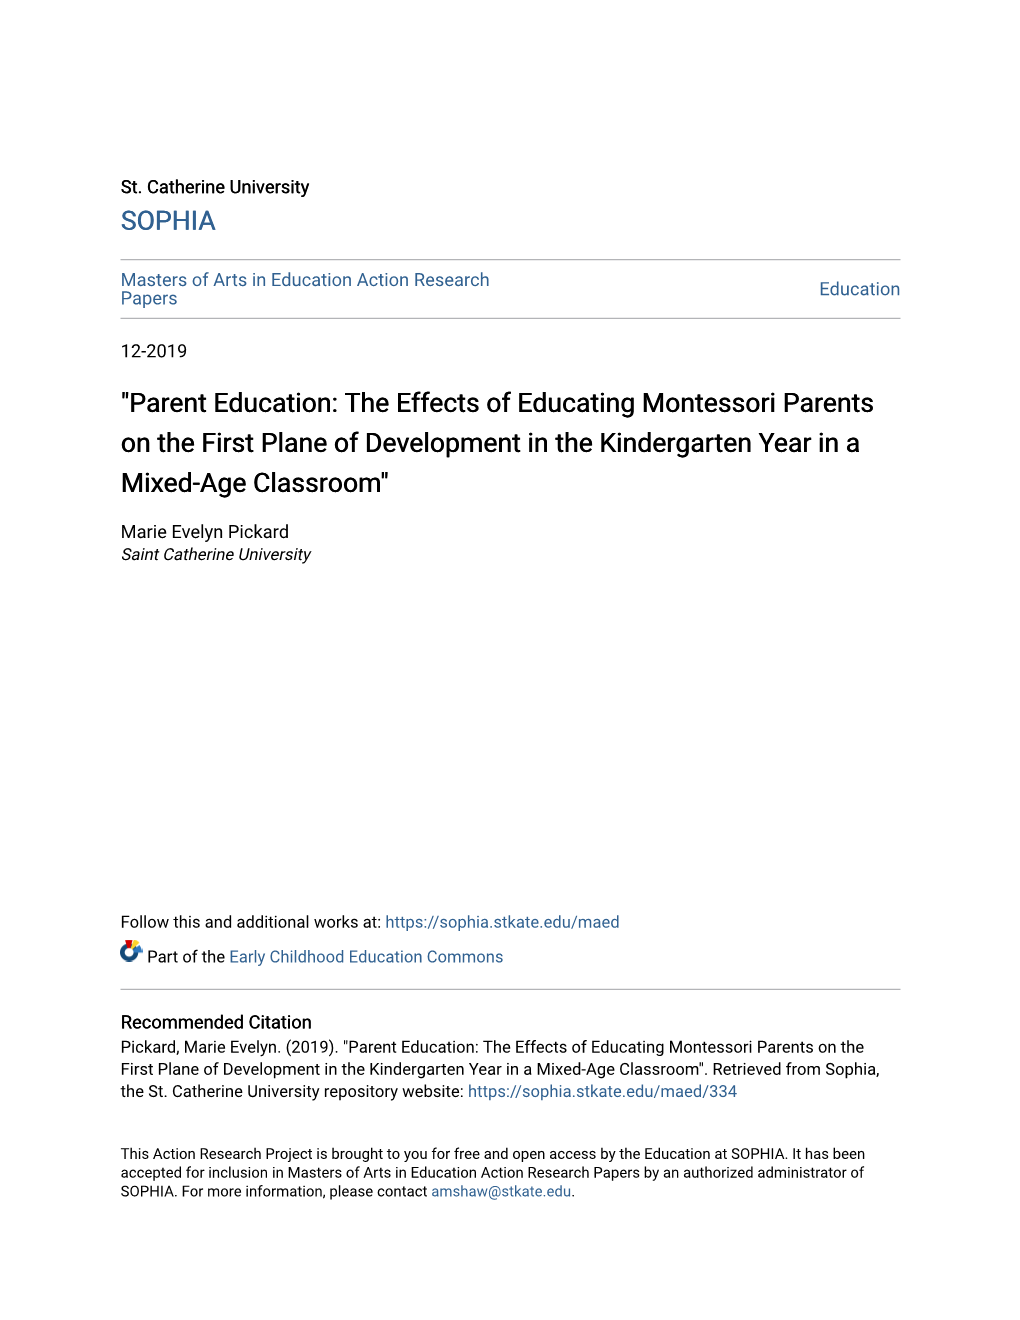 "Parent Education: the Effects of Educating Montessori Parents on the First Plane of Development in the Kindergarten Year in a Mixed-Age Classroom"